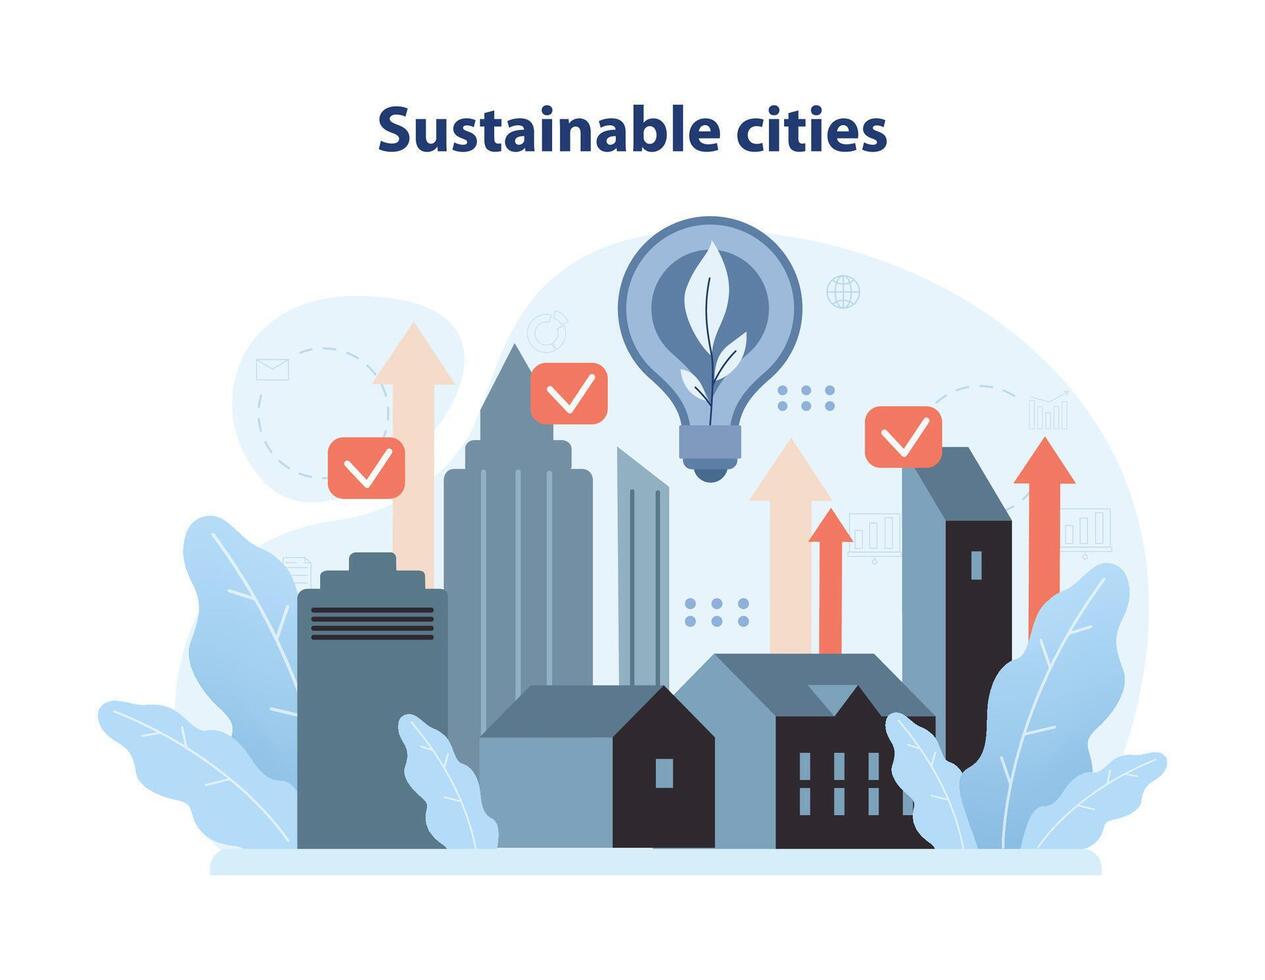 Sustainable cities depicted by a progressive skyline, eco-friendly light bulb, and rising arrows. Flat vector illustration